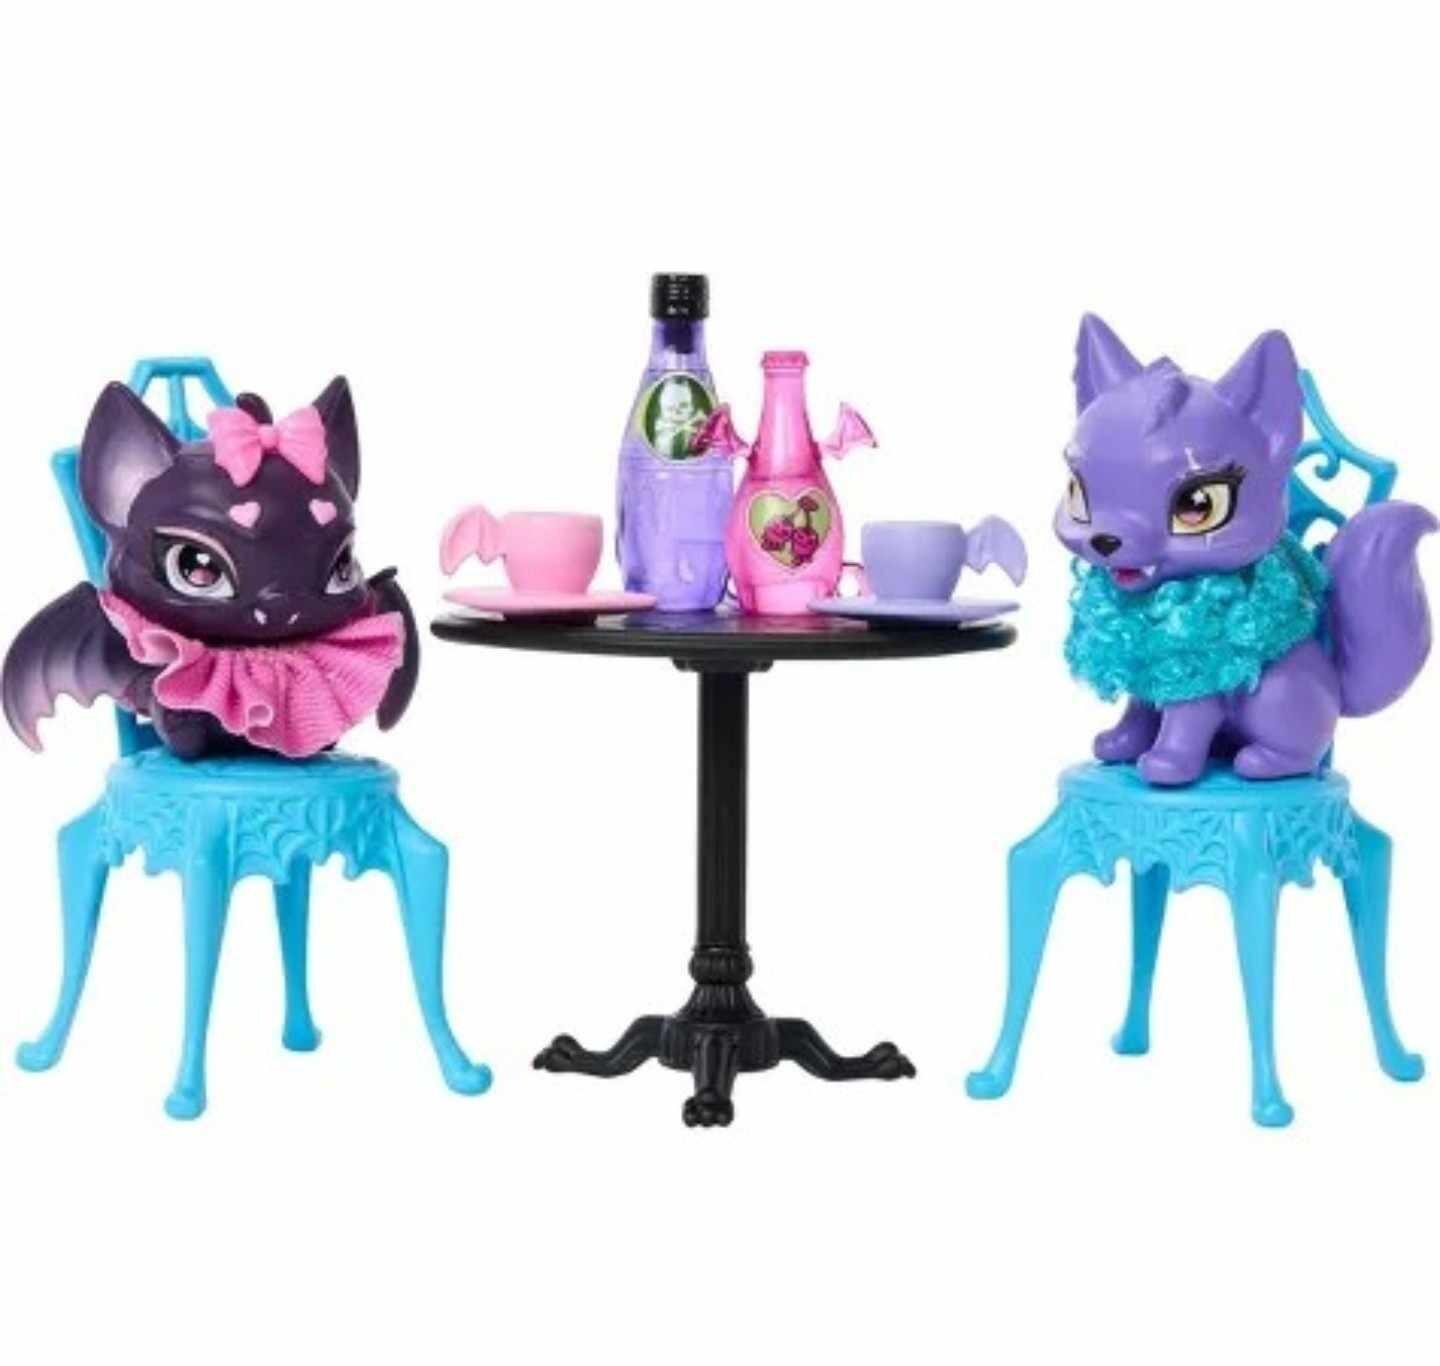 Monster High Faboolous Pets Draculaura and Clawdeen Wolf Fashion Dolls with Two Pets